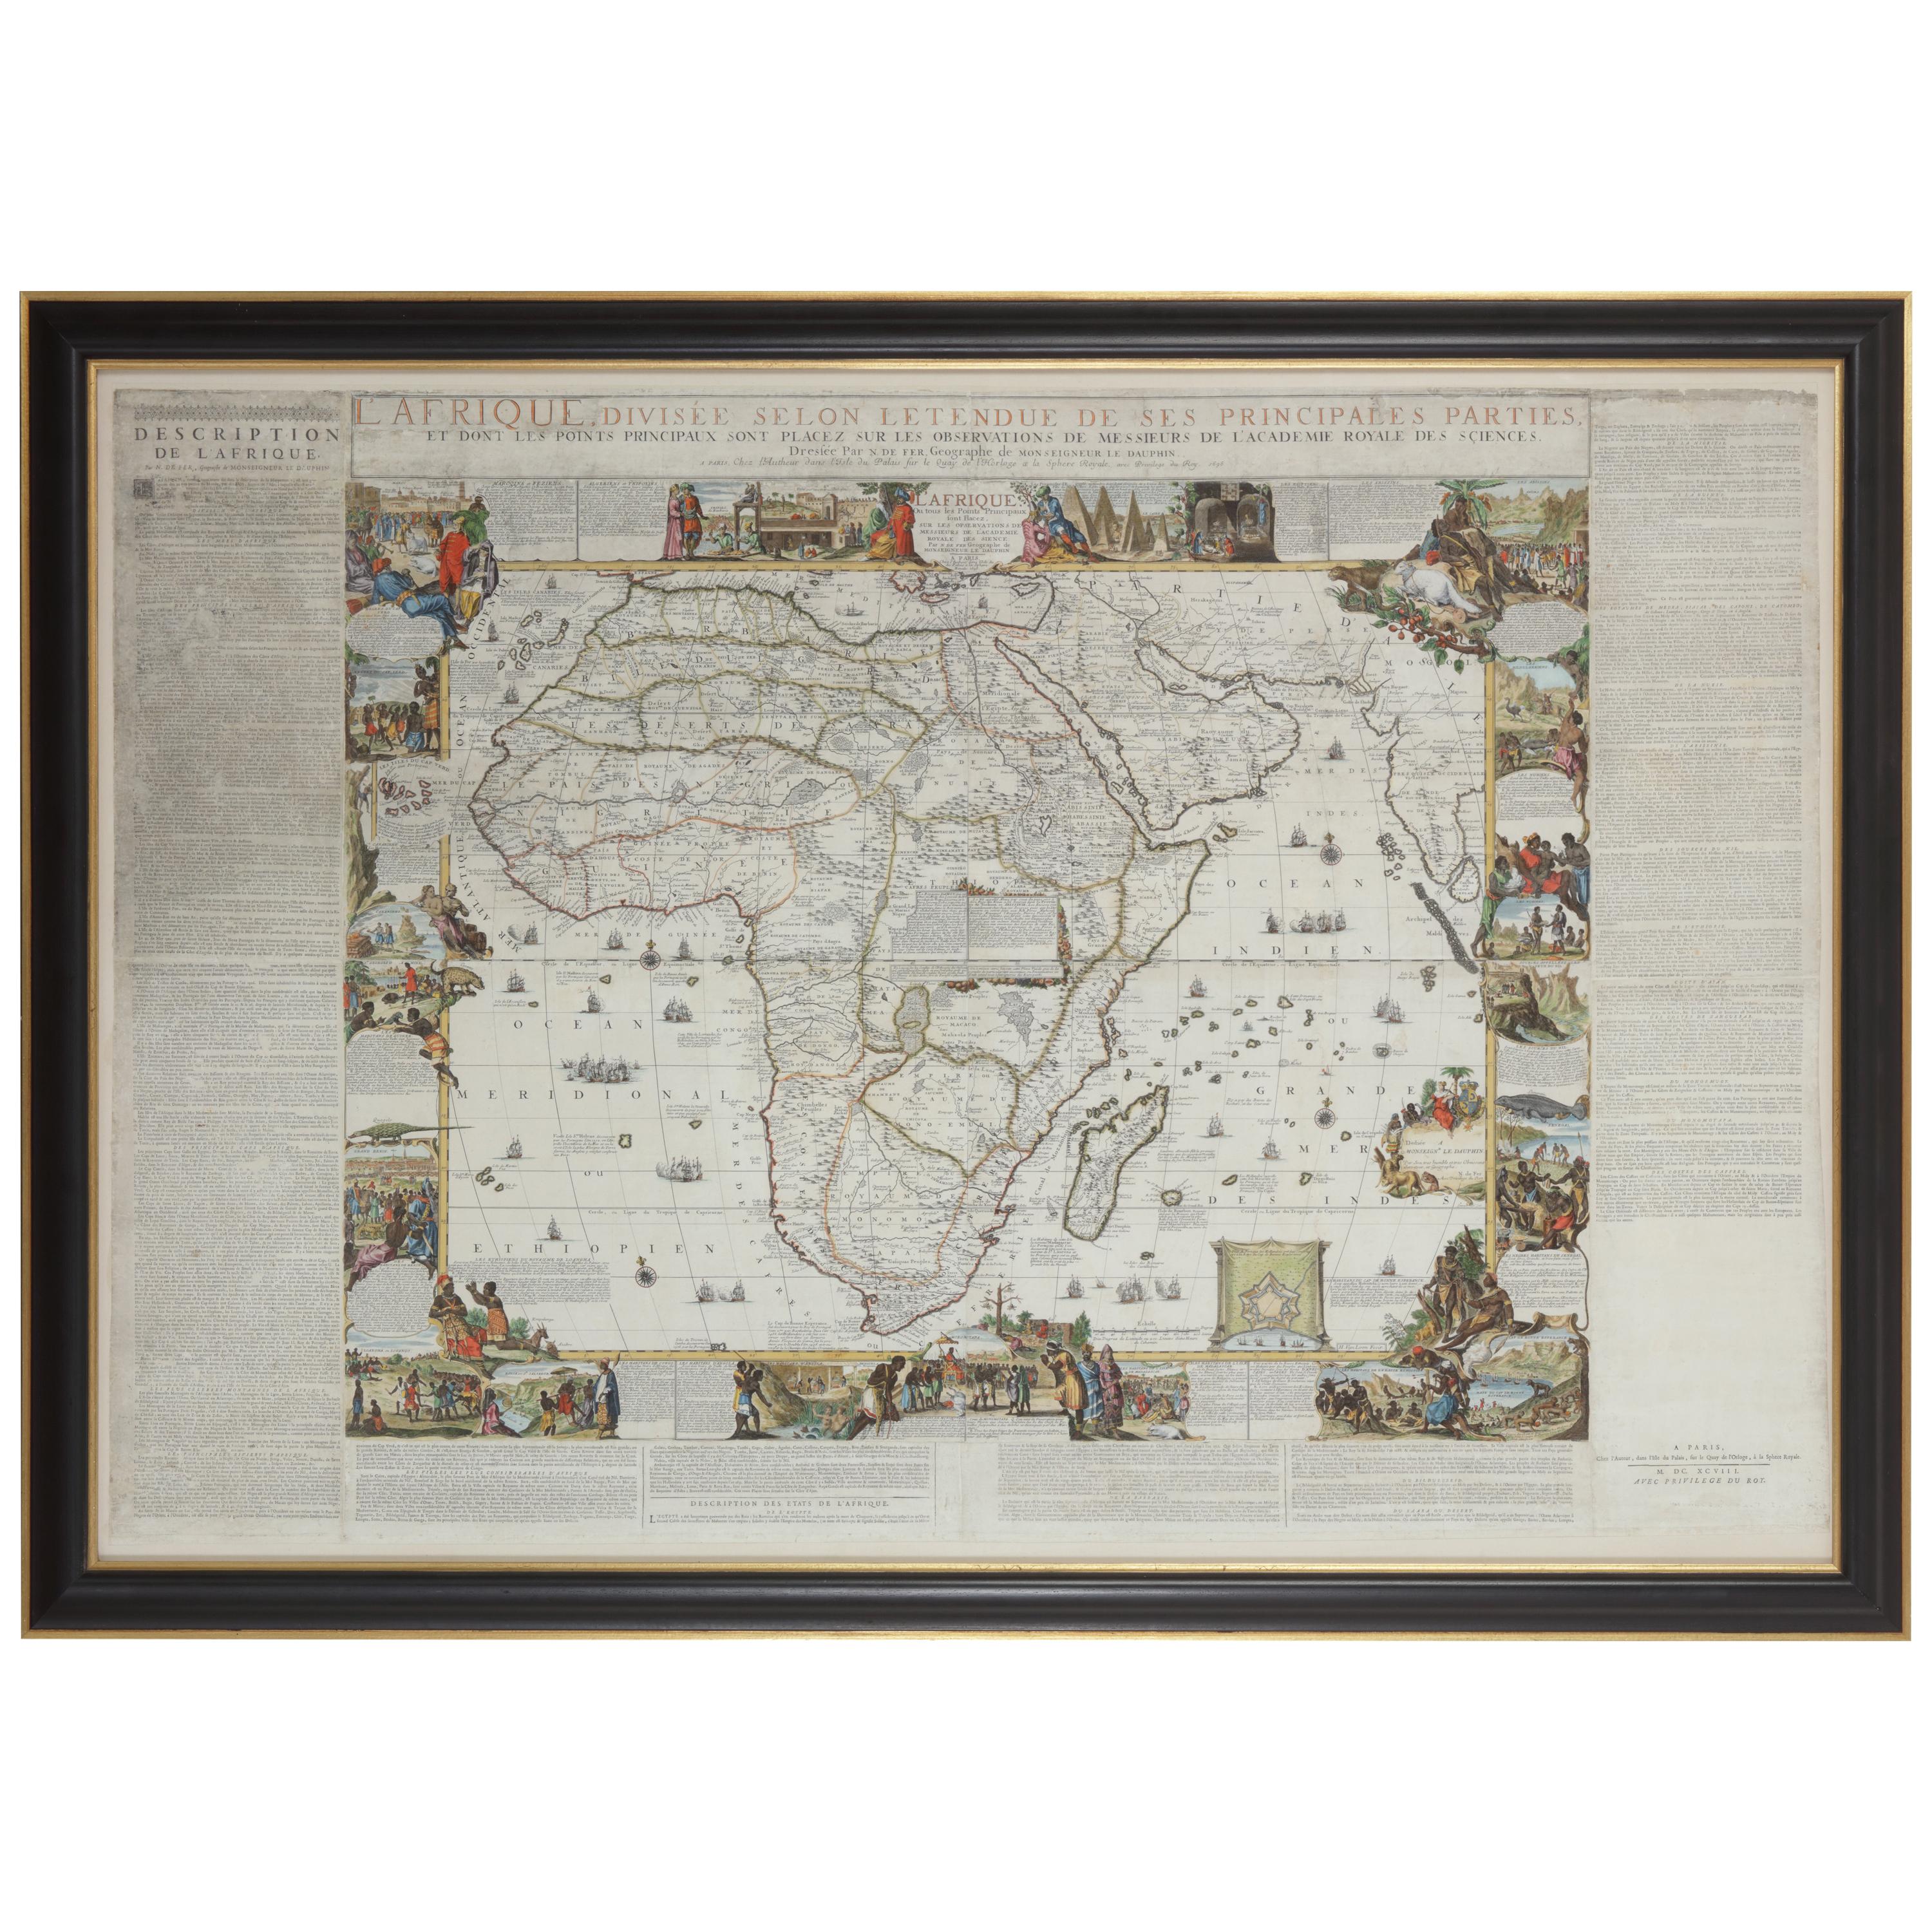 Framed Hand Colored Map of Africa by Nicolas de Fer